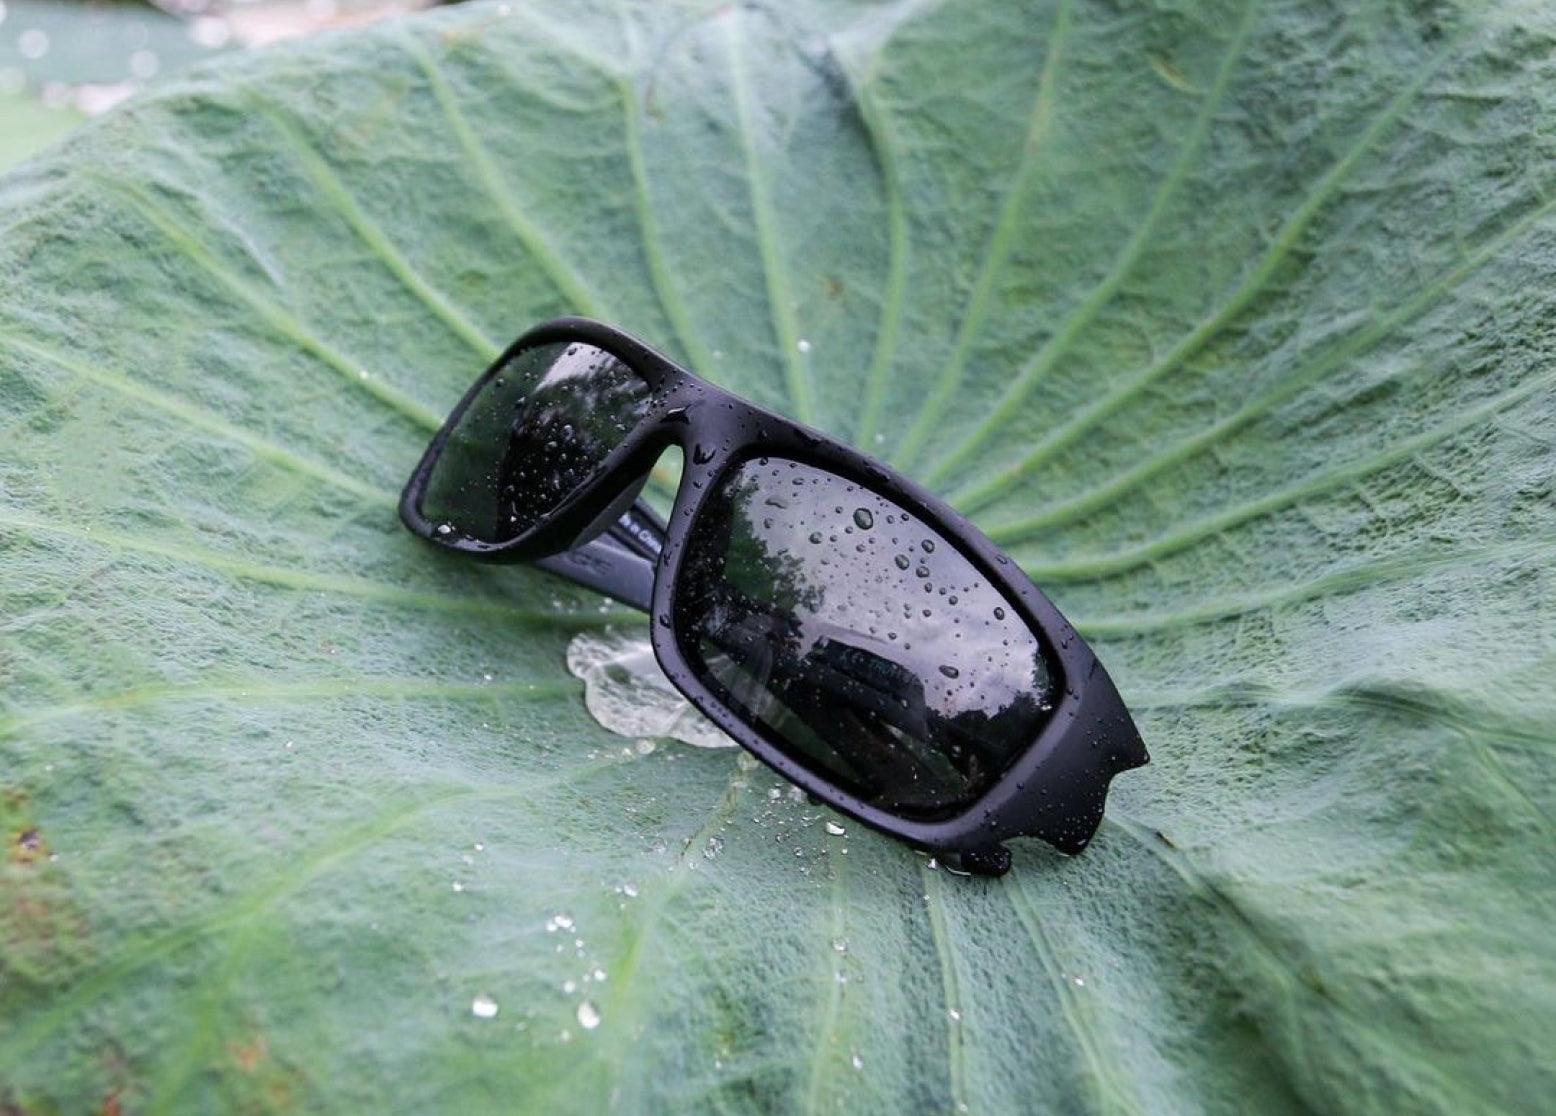 Sunglasses with resistance to seawater corrosion. - Torege® Eyewear